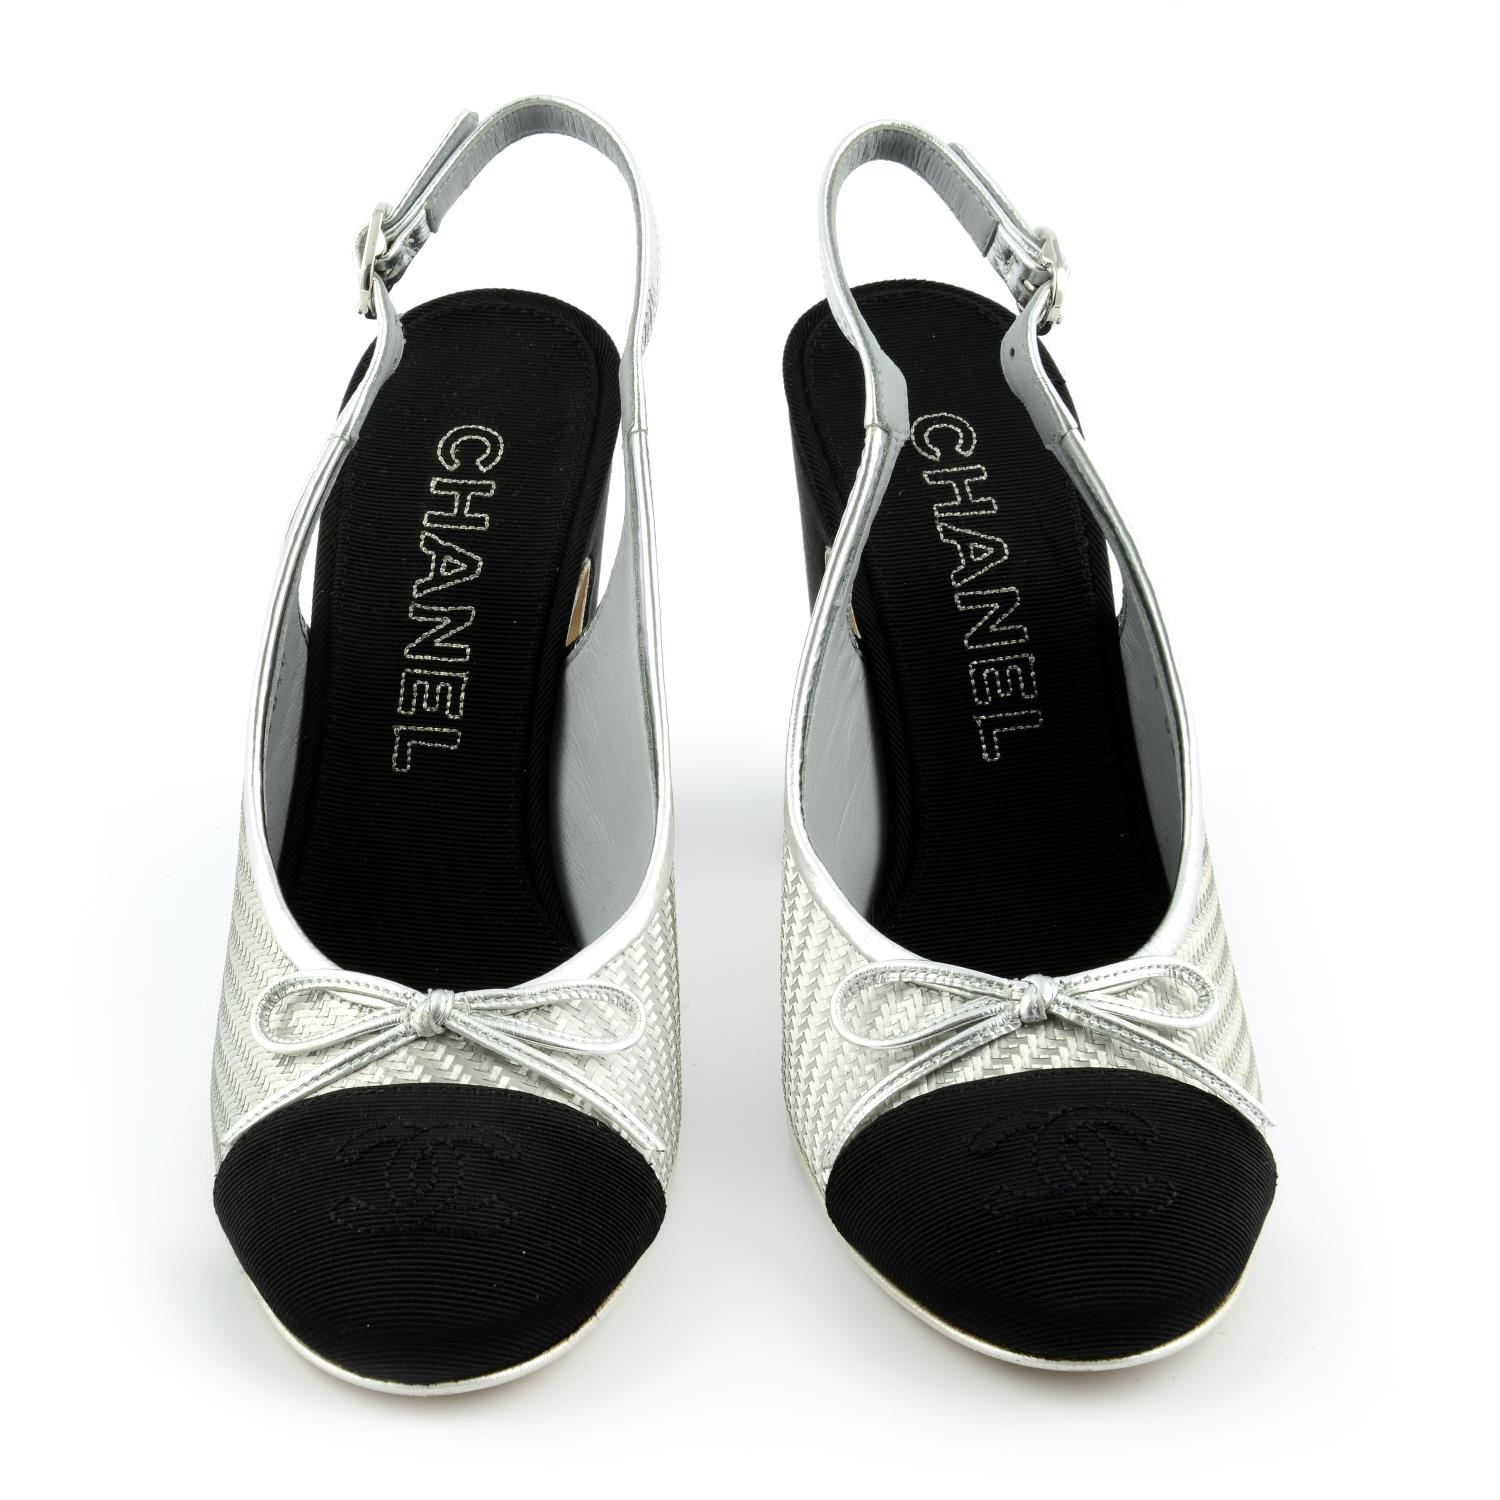 CHANEL - a pair of silver and black block heeled sandals. - Image 3 of 5